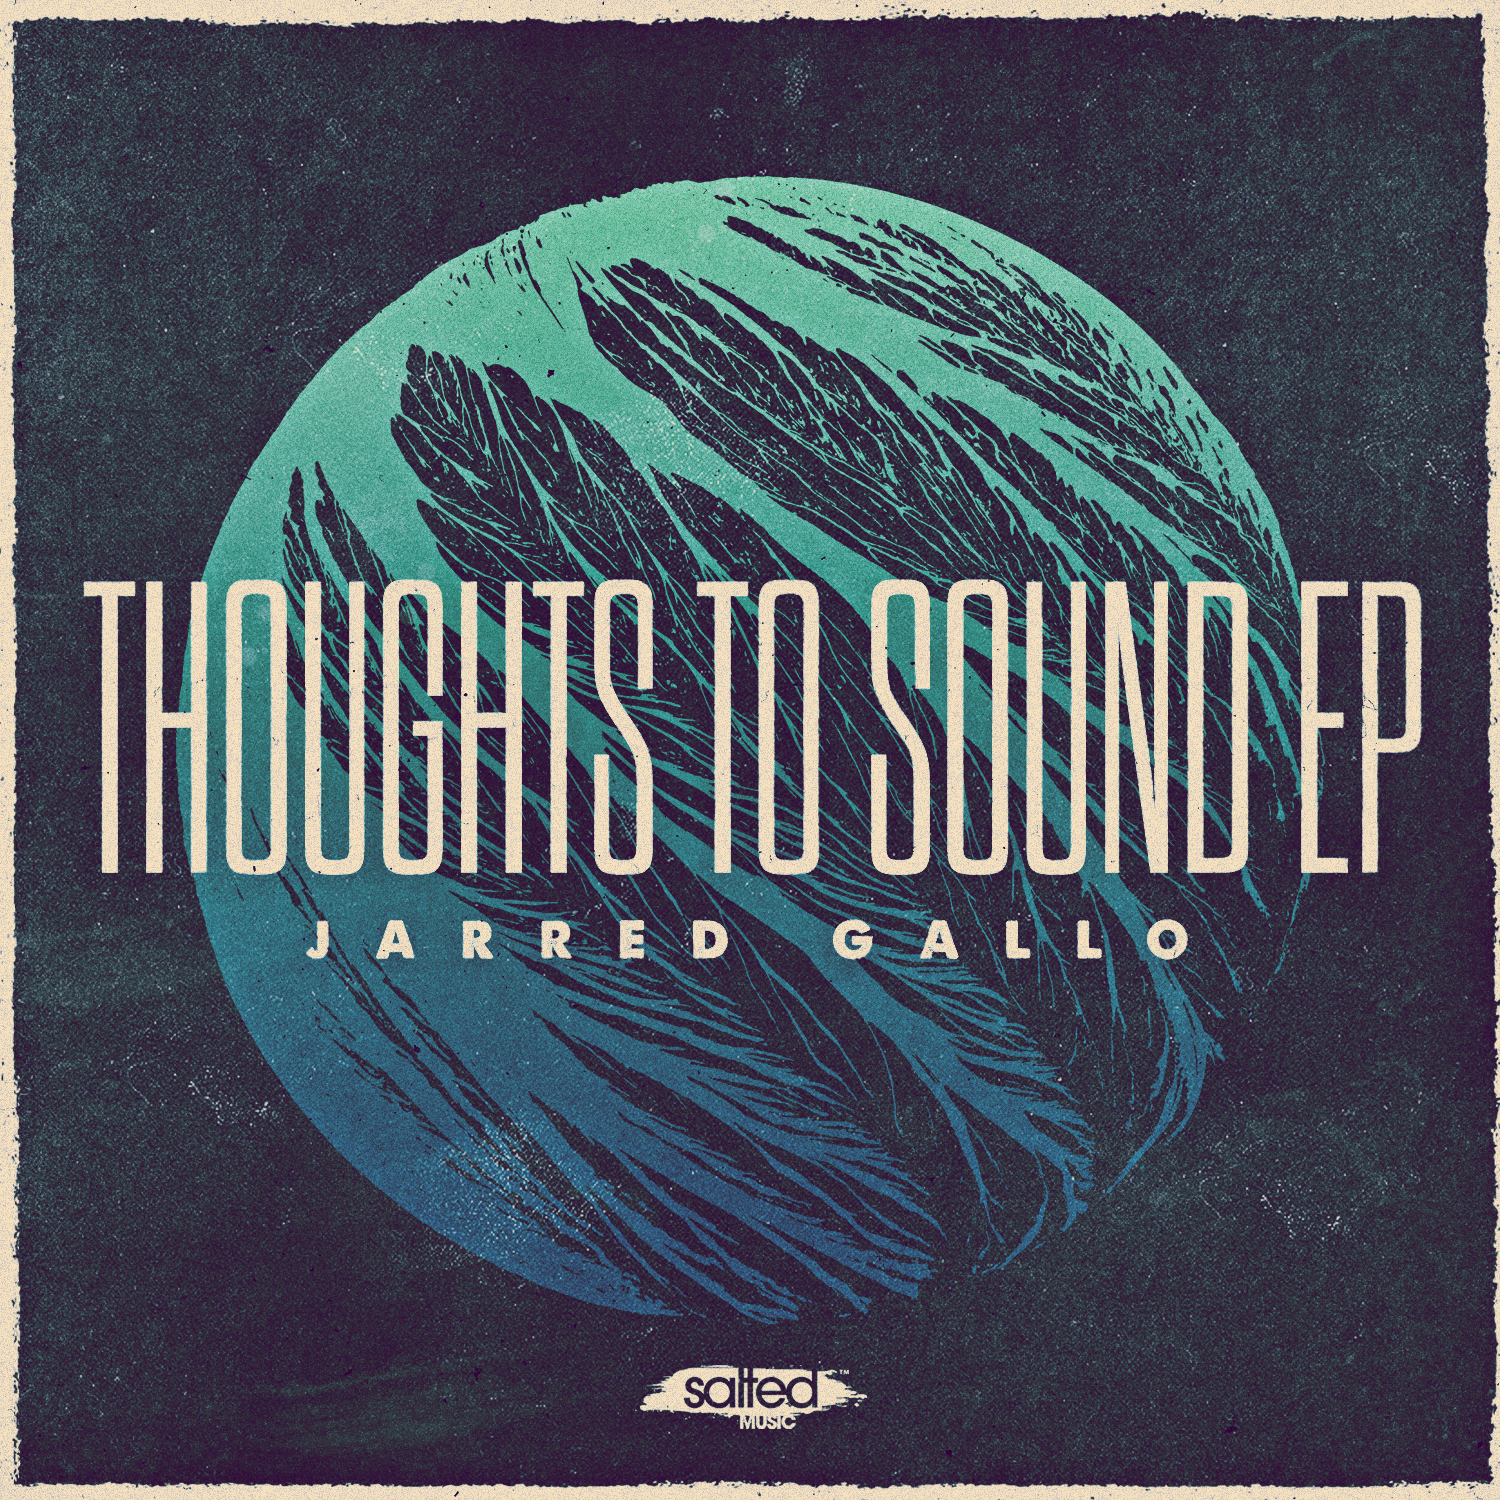 SLT122: Thoughts To Sound EP - Jarred Gallo (Salted Music)